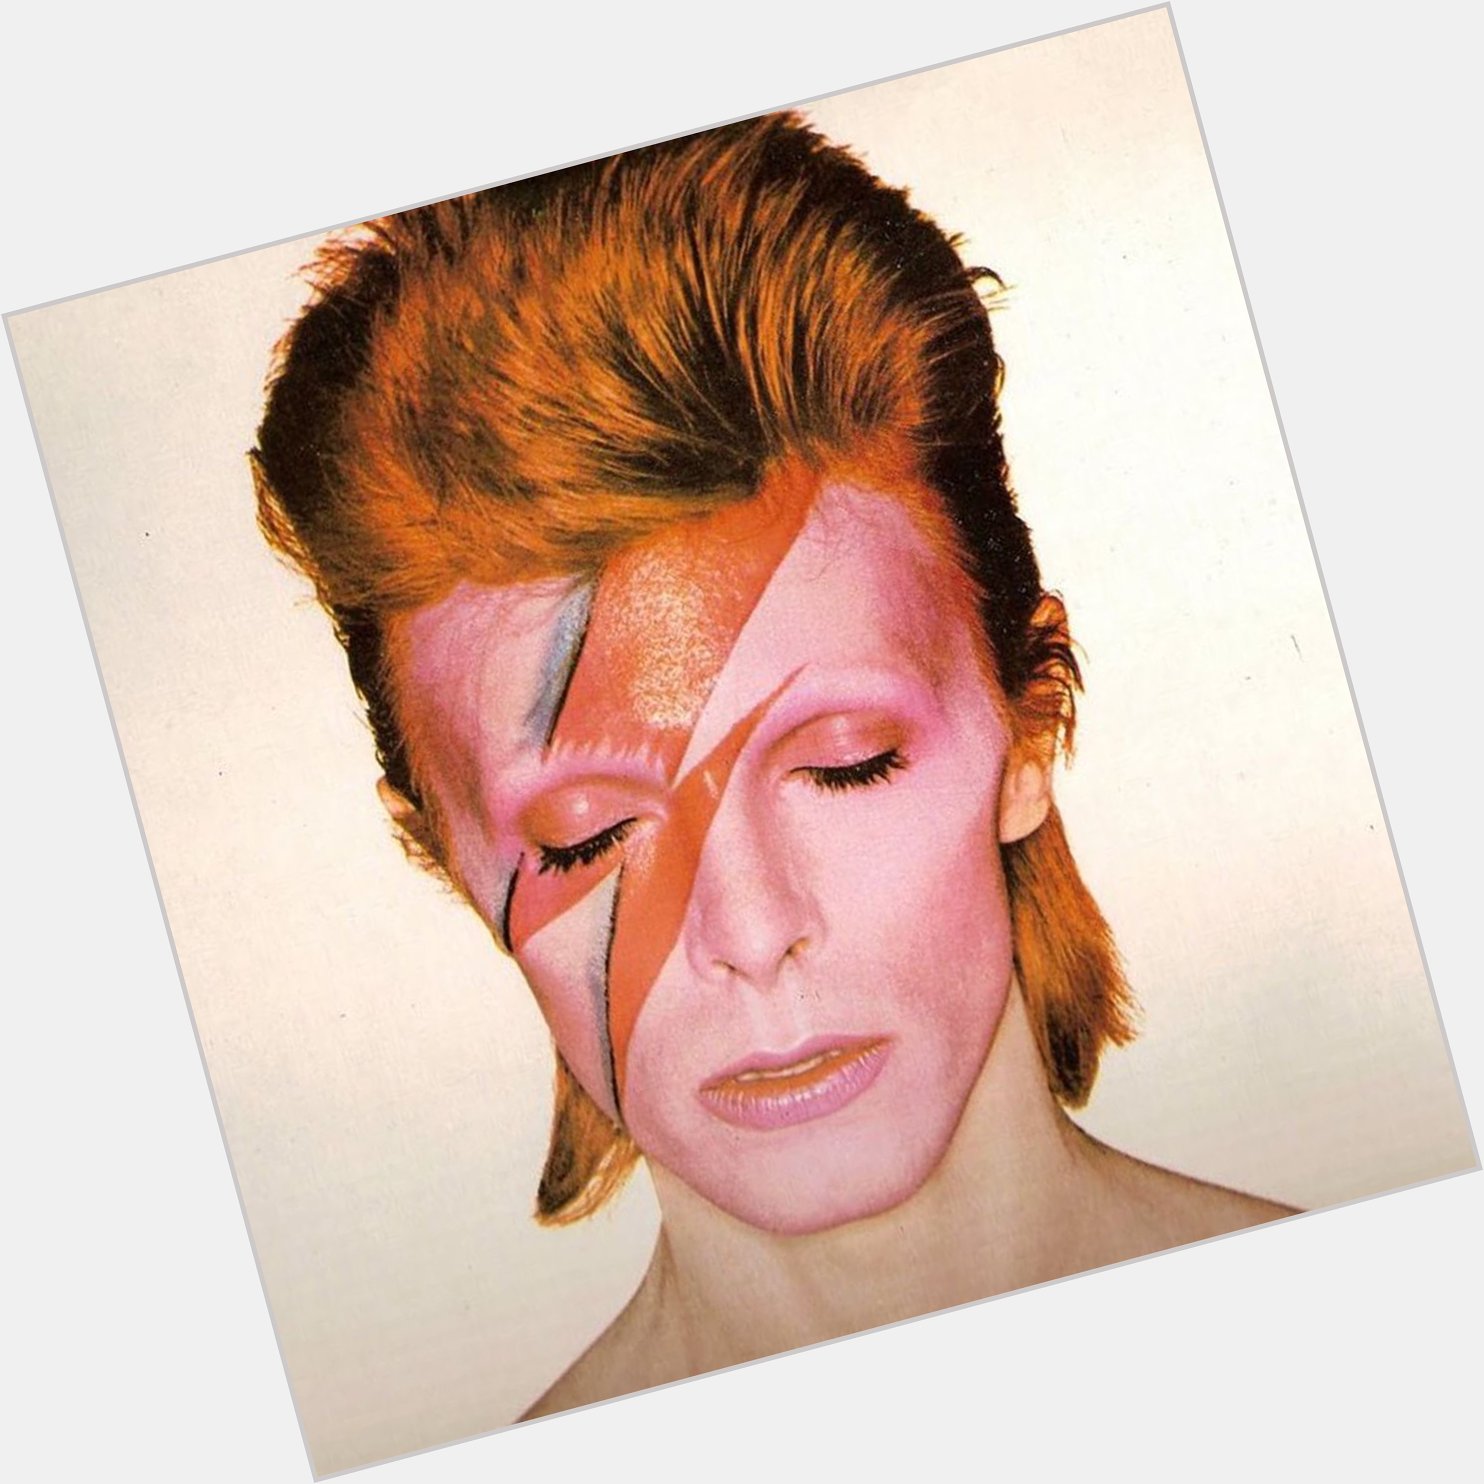 Today would\ve been David Bowie\s 74th birthday.

Musician, Actor, Pioneer. 

Happy Birthday, Starman 